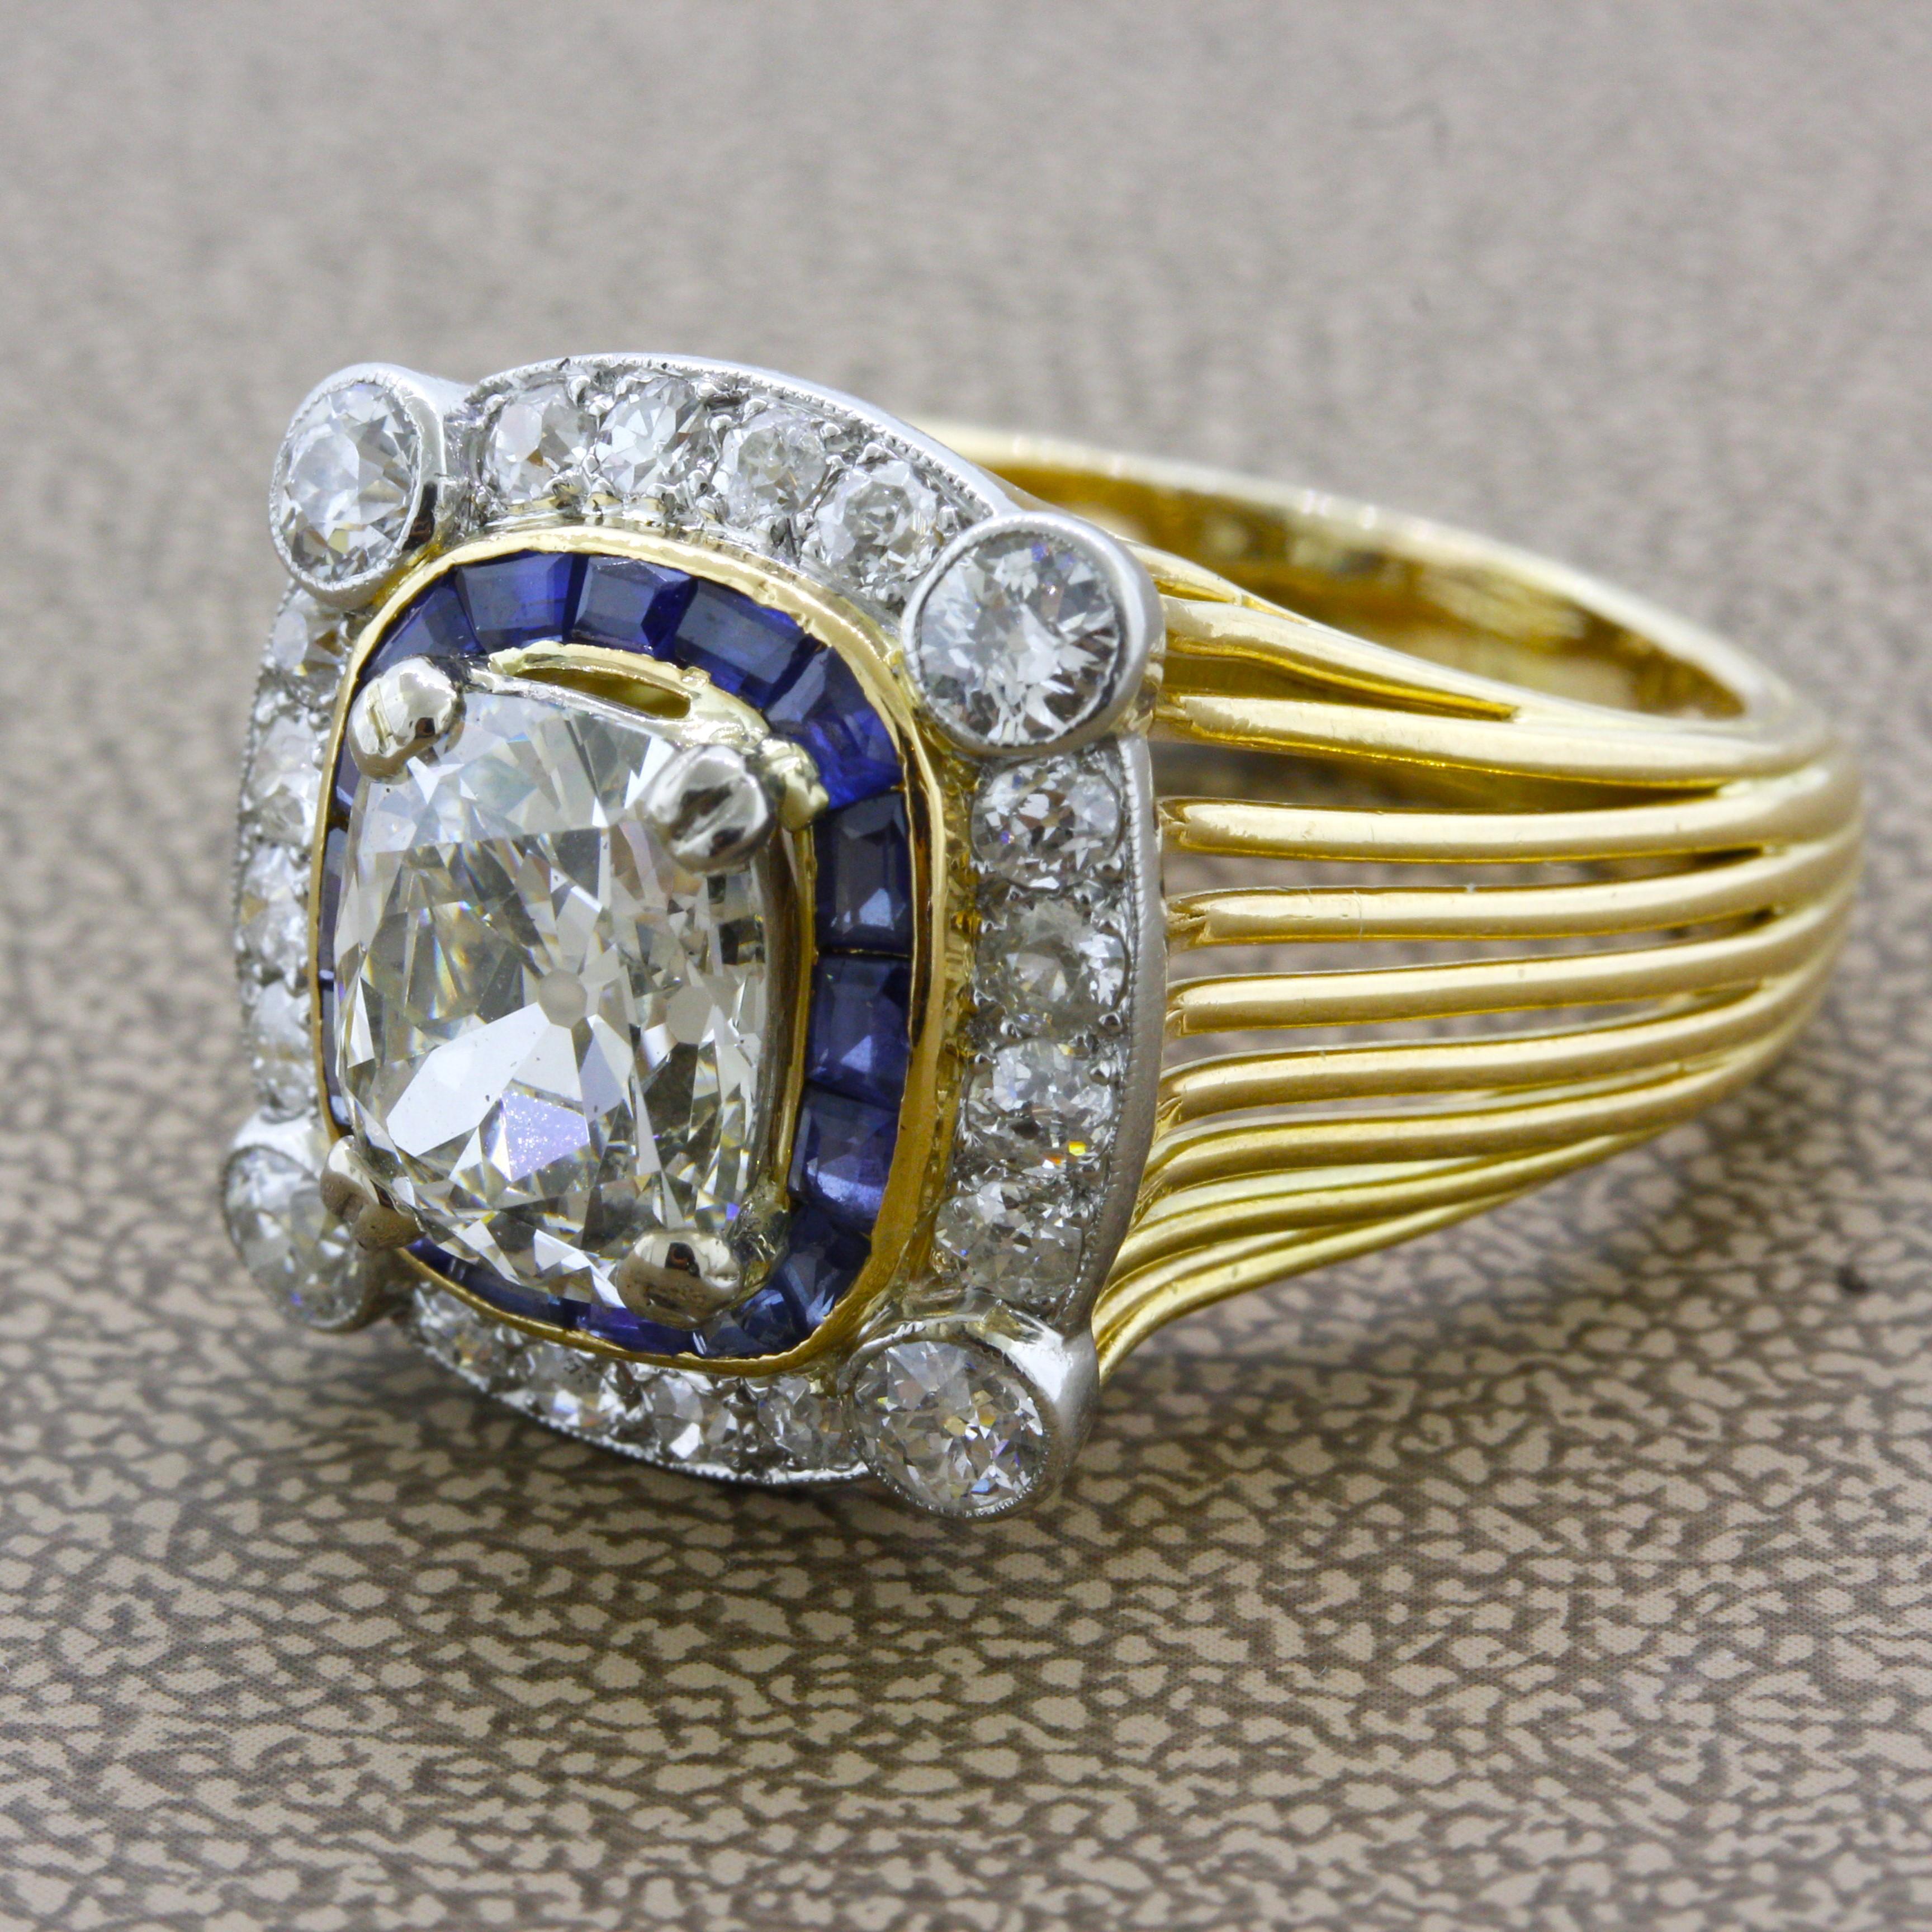 A Cartier original from the 1930’s featuring a 3.17 carat old-cushion-cut diamond with K color and SI1 clarity. Around the center diamond are a halo of blue sapphires as well as an outer halo of additional old-cut diamonds. Made in 18k yellow gold